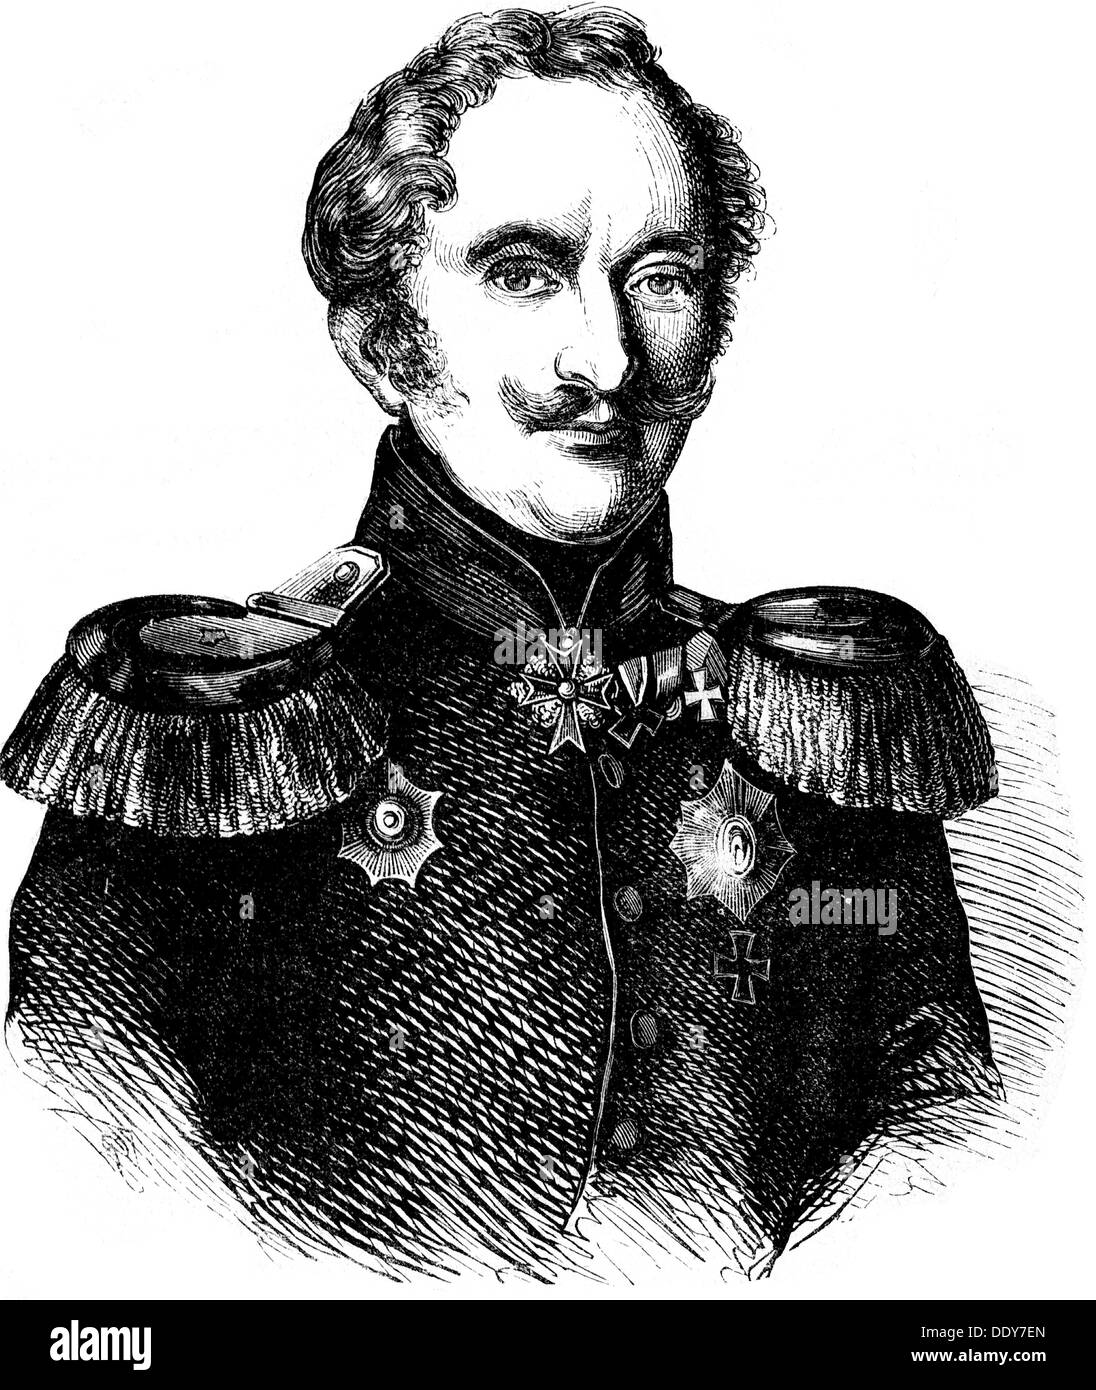 Colomb, Friedrich August Peter von, 19.6.1775 - 12.11.1854, Prussian general, general commanding the V Army Corps in Posen 1843 - 1849, half length, wood engraving, circa 1845, Stock Photo